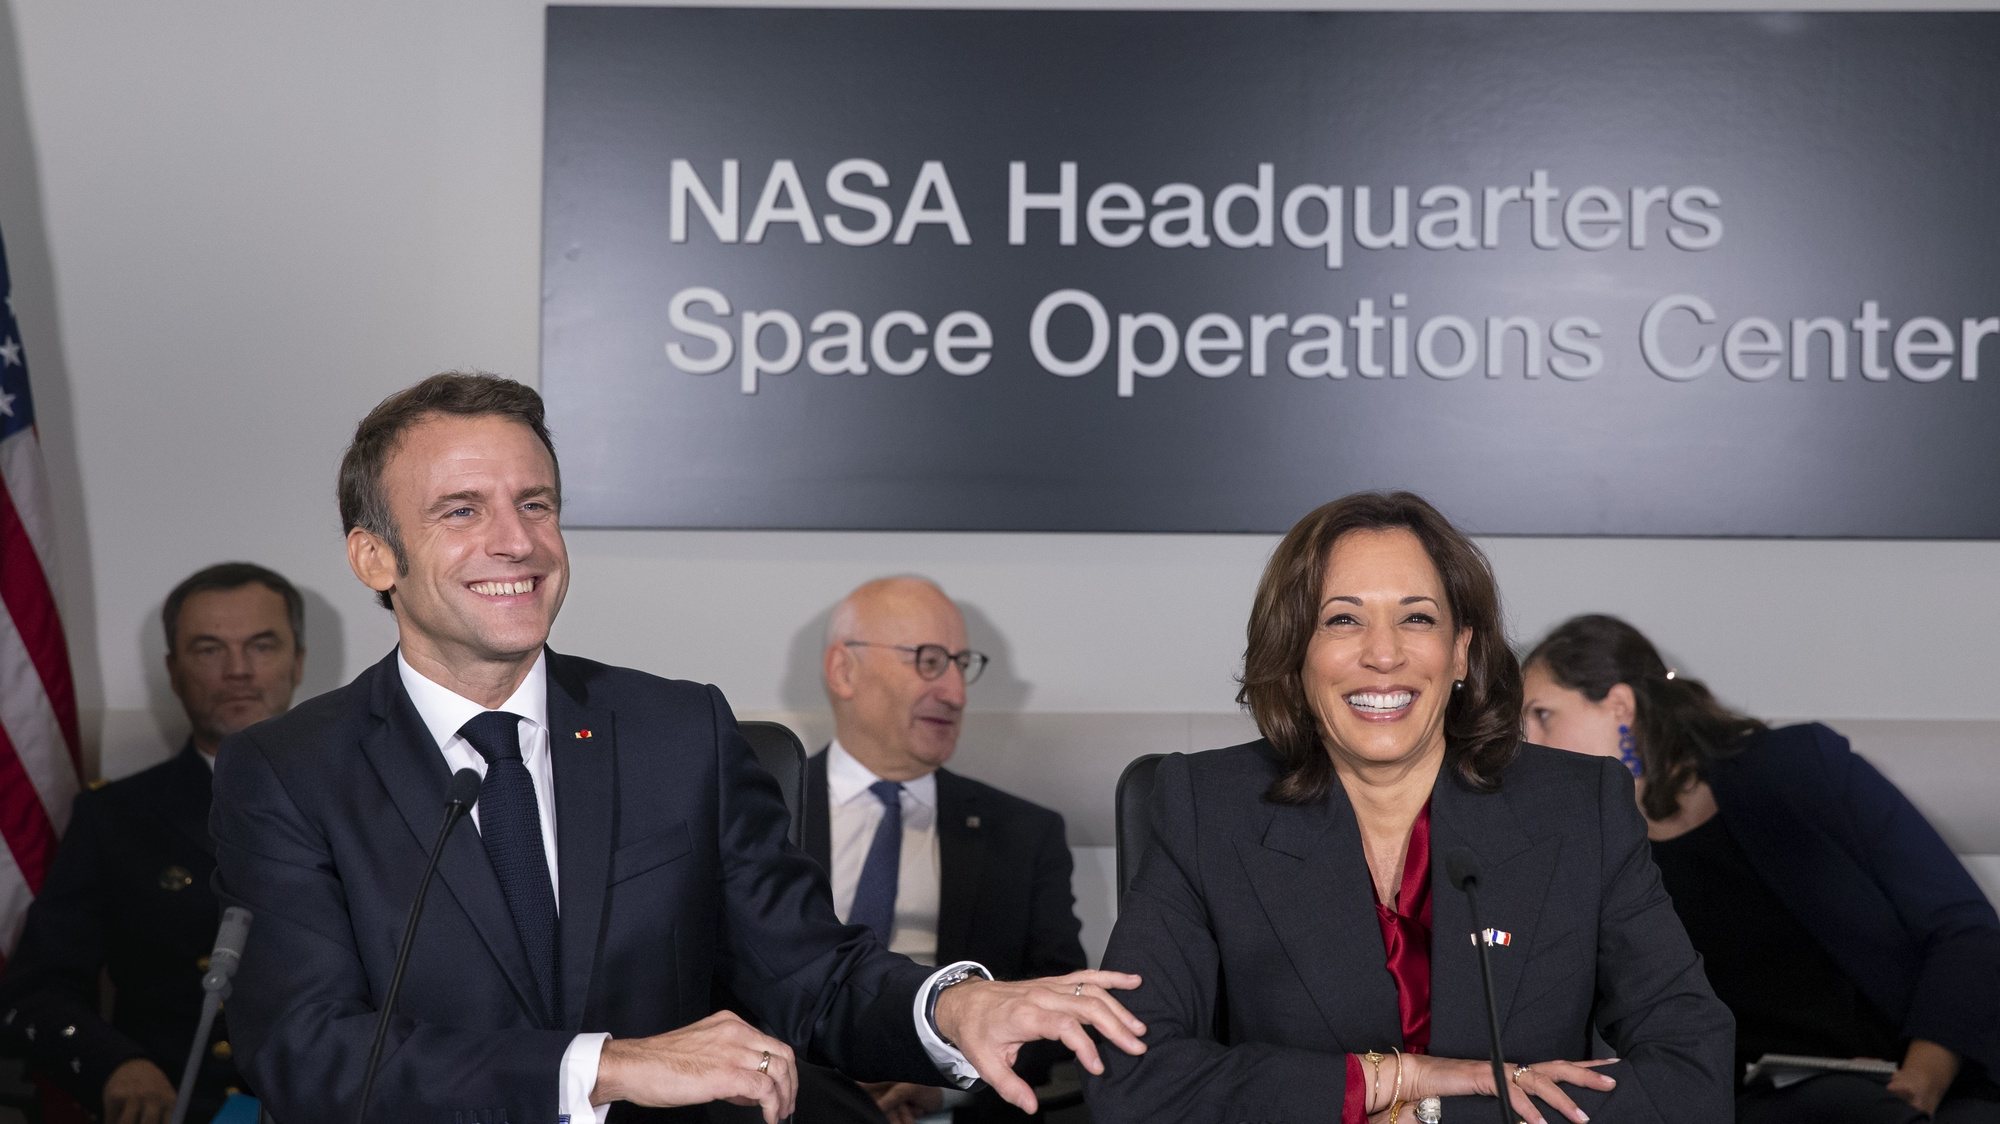 epa10339278 France&#039;s President Emmanuel Macron (L) meets with US Vice President Kamala Harris (R) at the National Aeronautics and Space Administration (NASA) headquarters, to highlight space cooperation between France and the US, in Washington, DC, USA, 30 November 2022. Macron is in Washington for the first state visit of the Biden presidency.  EPA/MICHAEL REYNOLDS